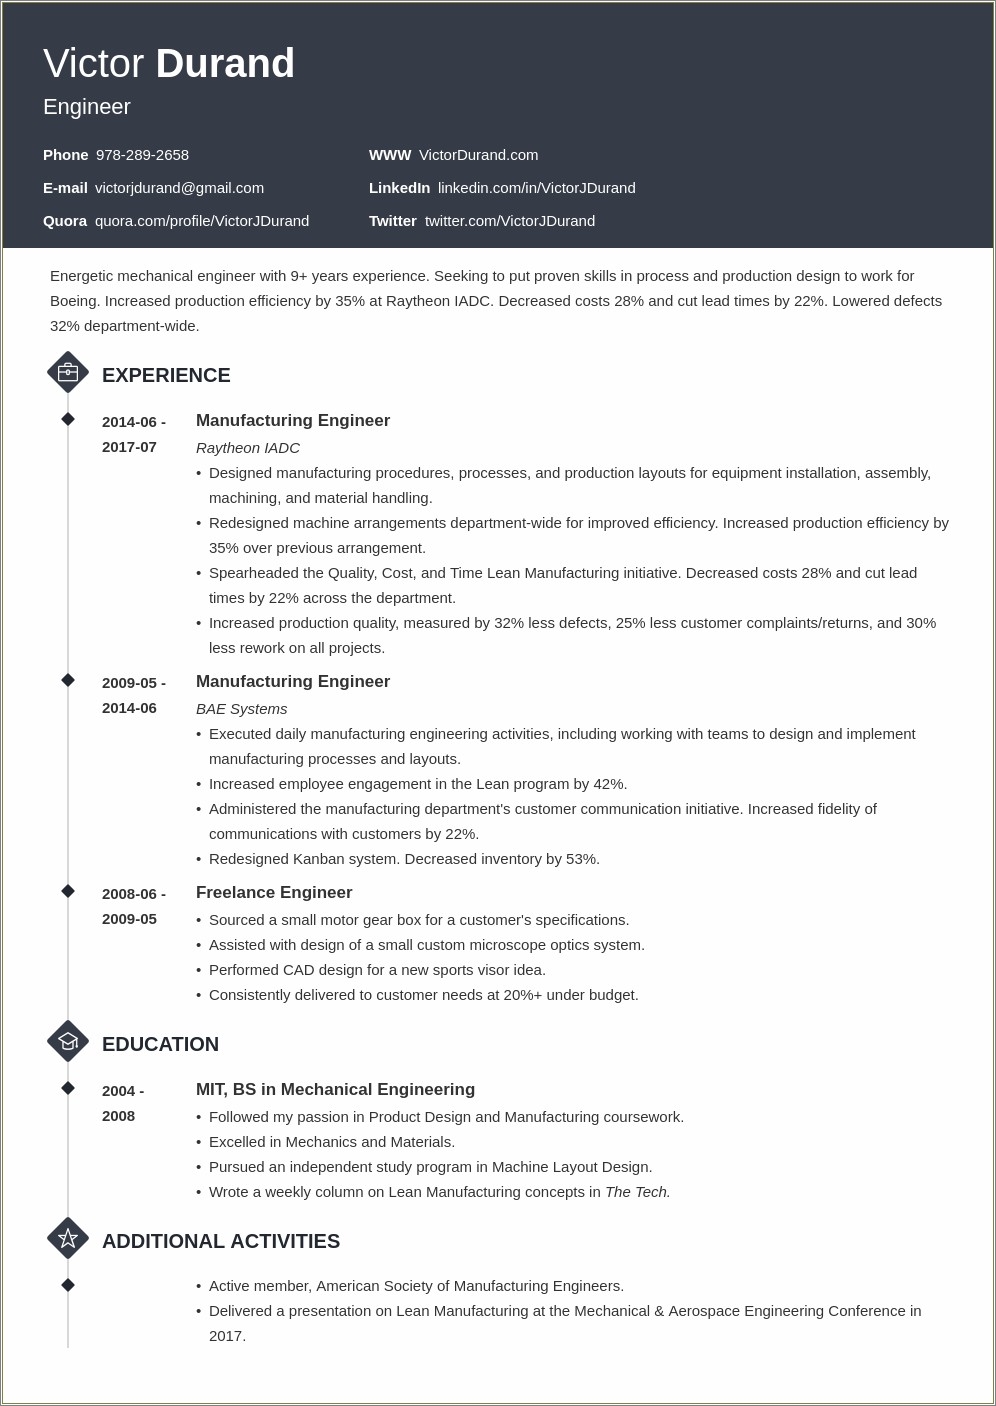 Examples Of Process Engineer's Personal Resume Website